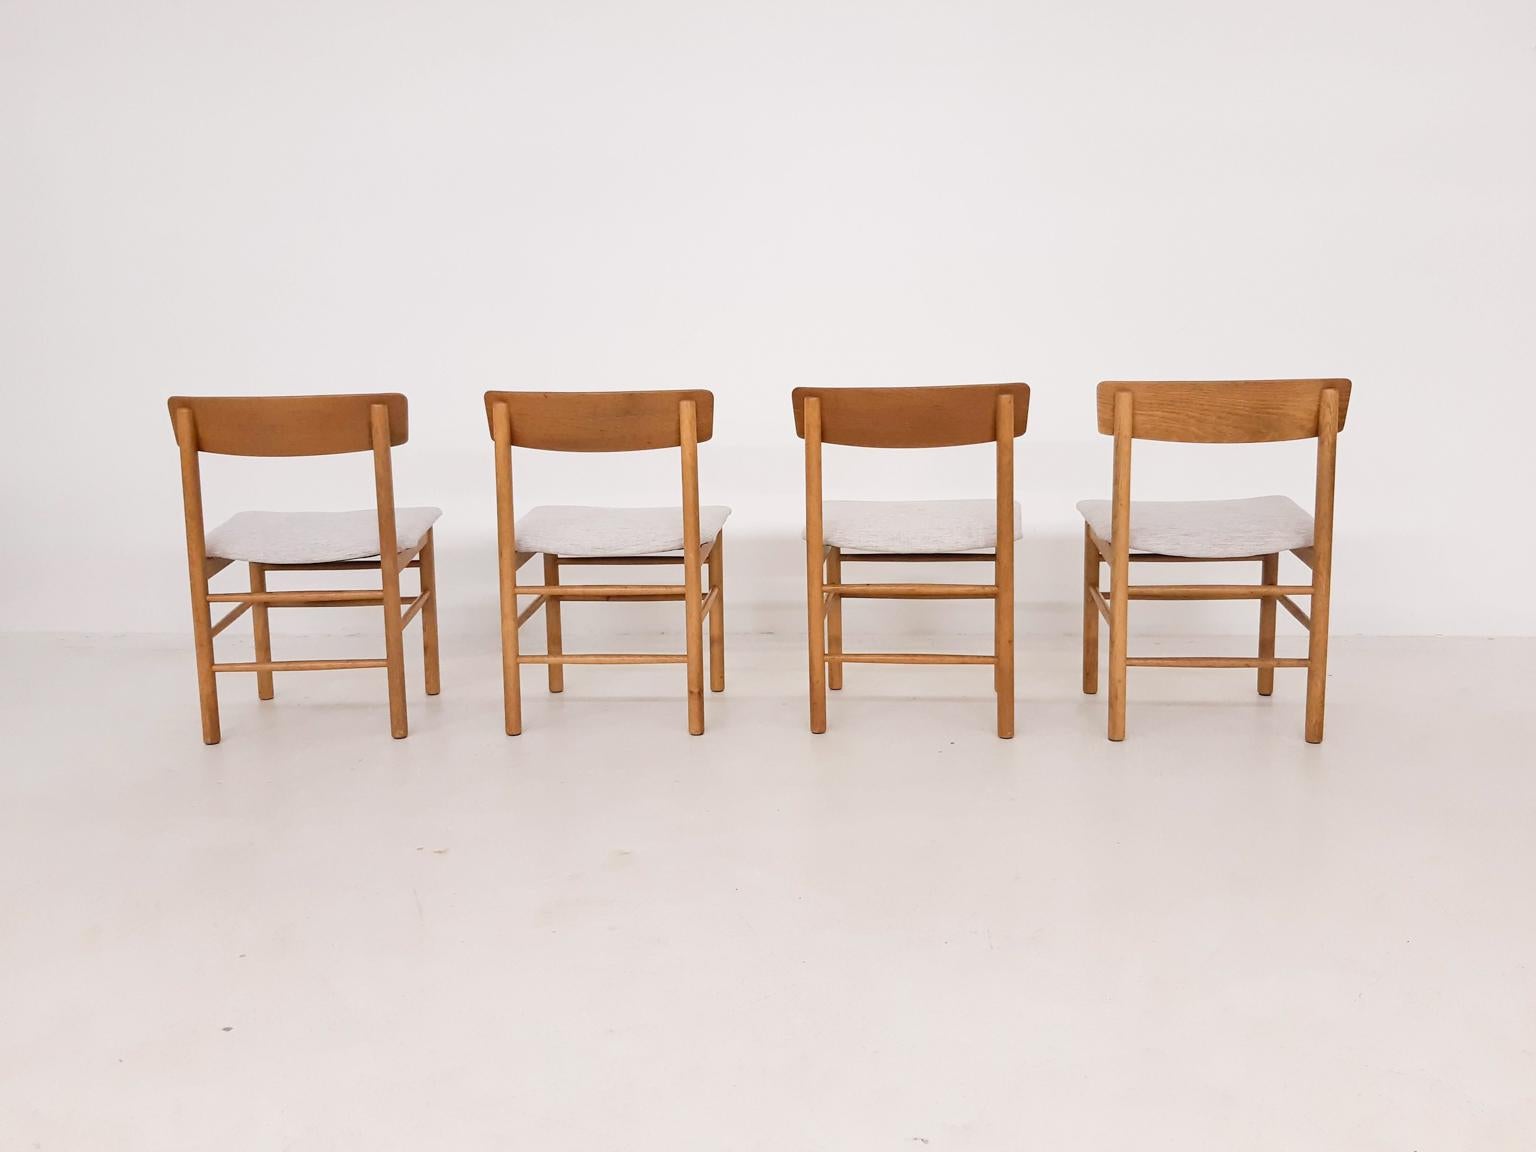 Danish Set of 4 Oak Dining Chairs in the Style of Borge Mogensen, Denmark, 1960s For Sale